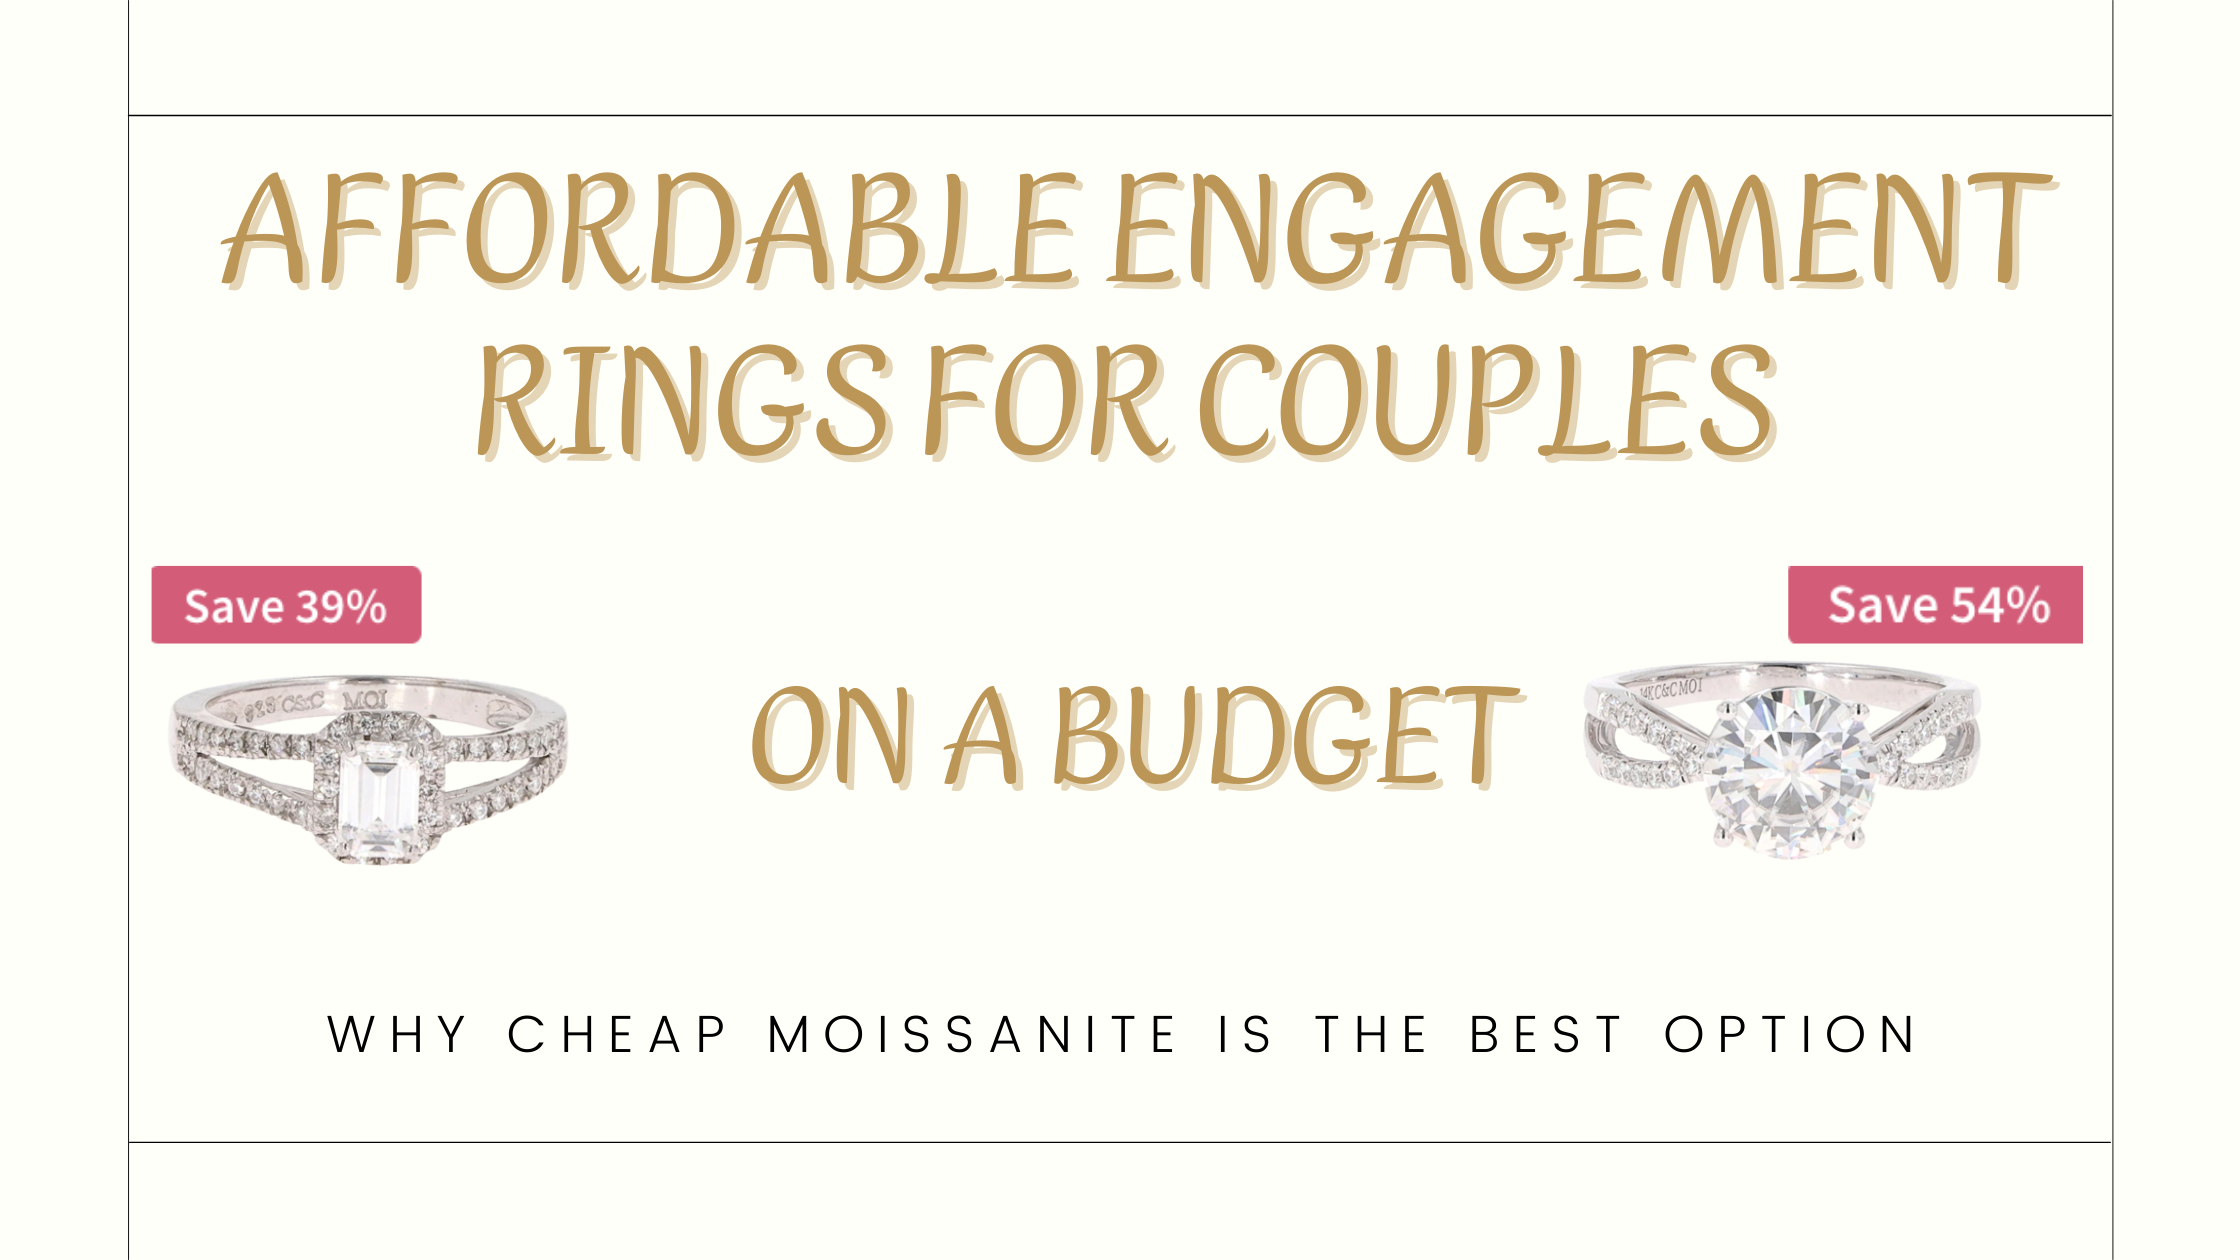 Affordable Engagement Rings for Couples on a Budget: Why Cheap Moissanite is the Best Option